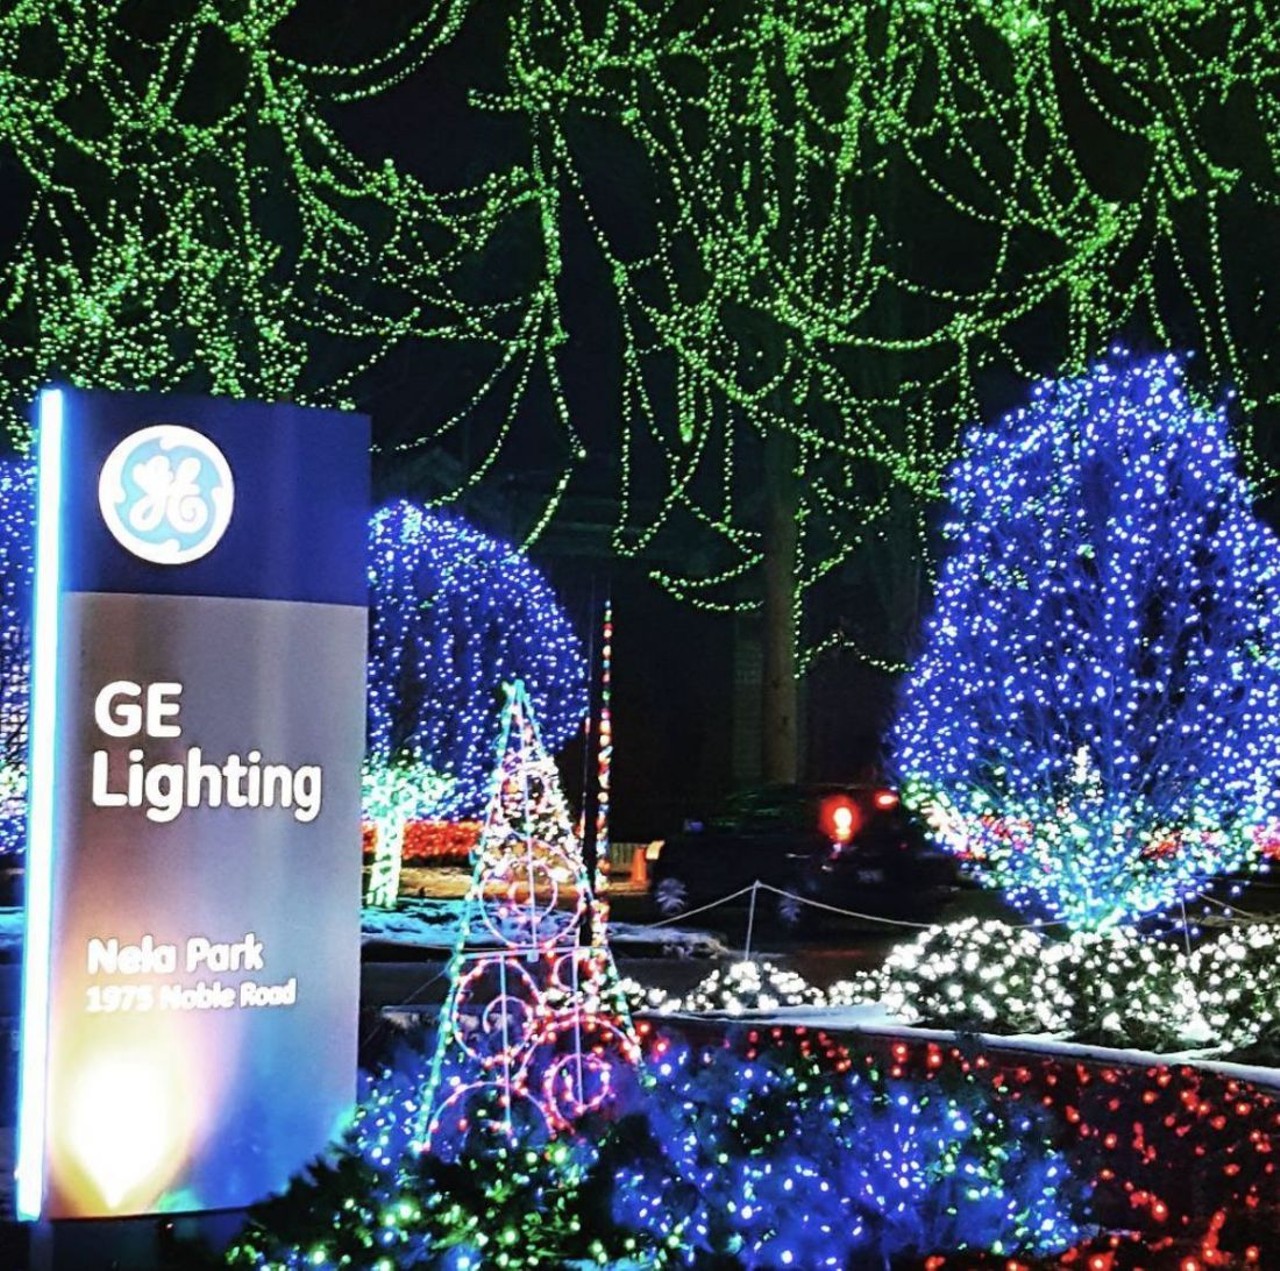  Nela Park
If you're in the mood to see a really extraordinary holiday lighting display at no cost, General Electric&#146;s Nela Park has got you covered. For the 97th year, you can visit the most well-known light display in Cleveland, which begins on December 3rd and goes until January 3rd.
Photo via @Christina.B323/Instagram